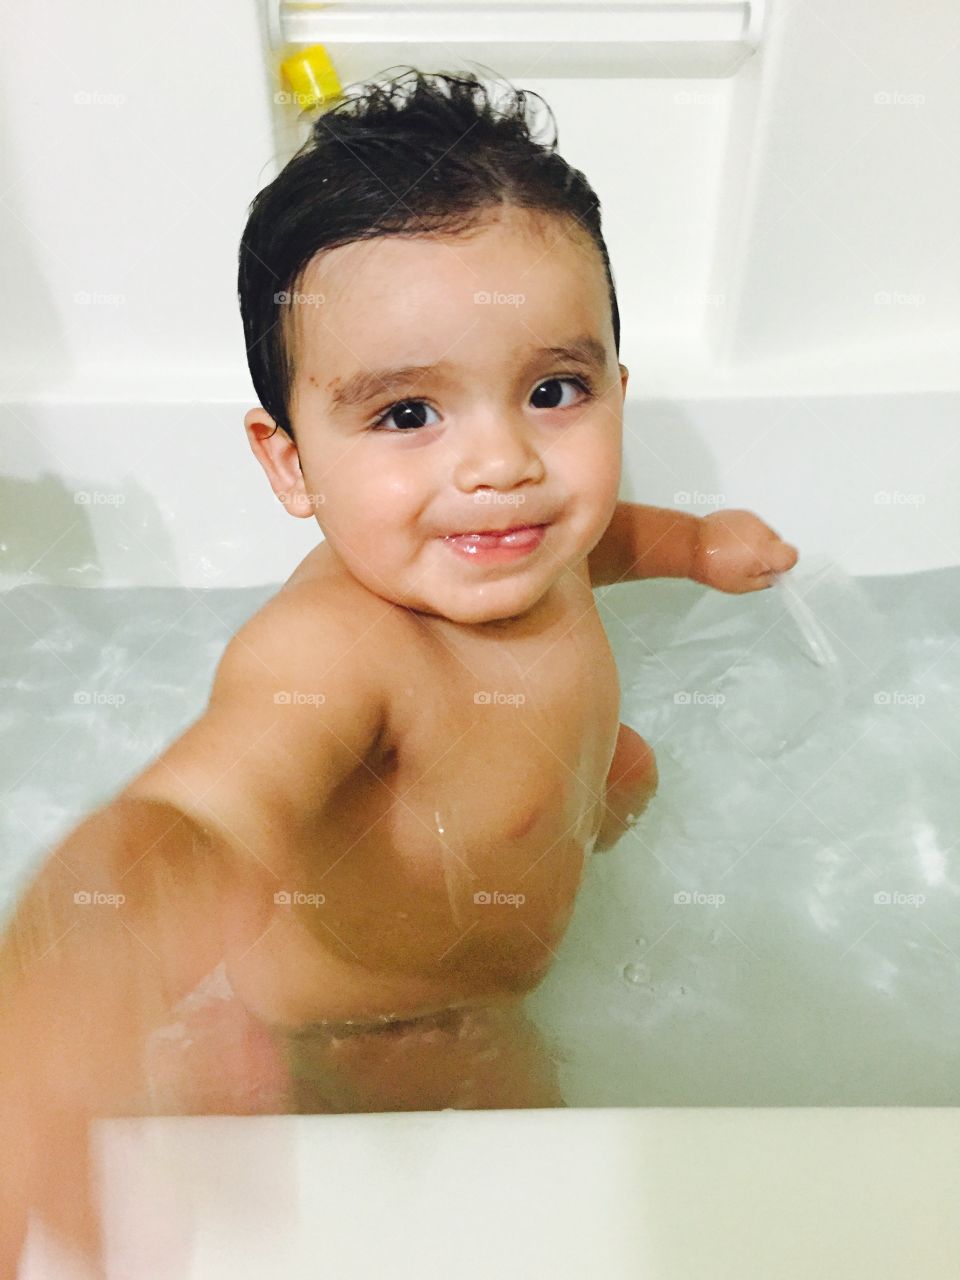 Baby in the tub 